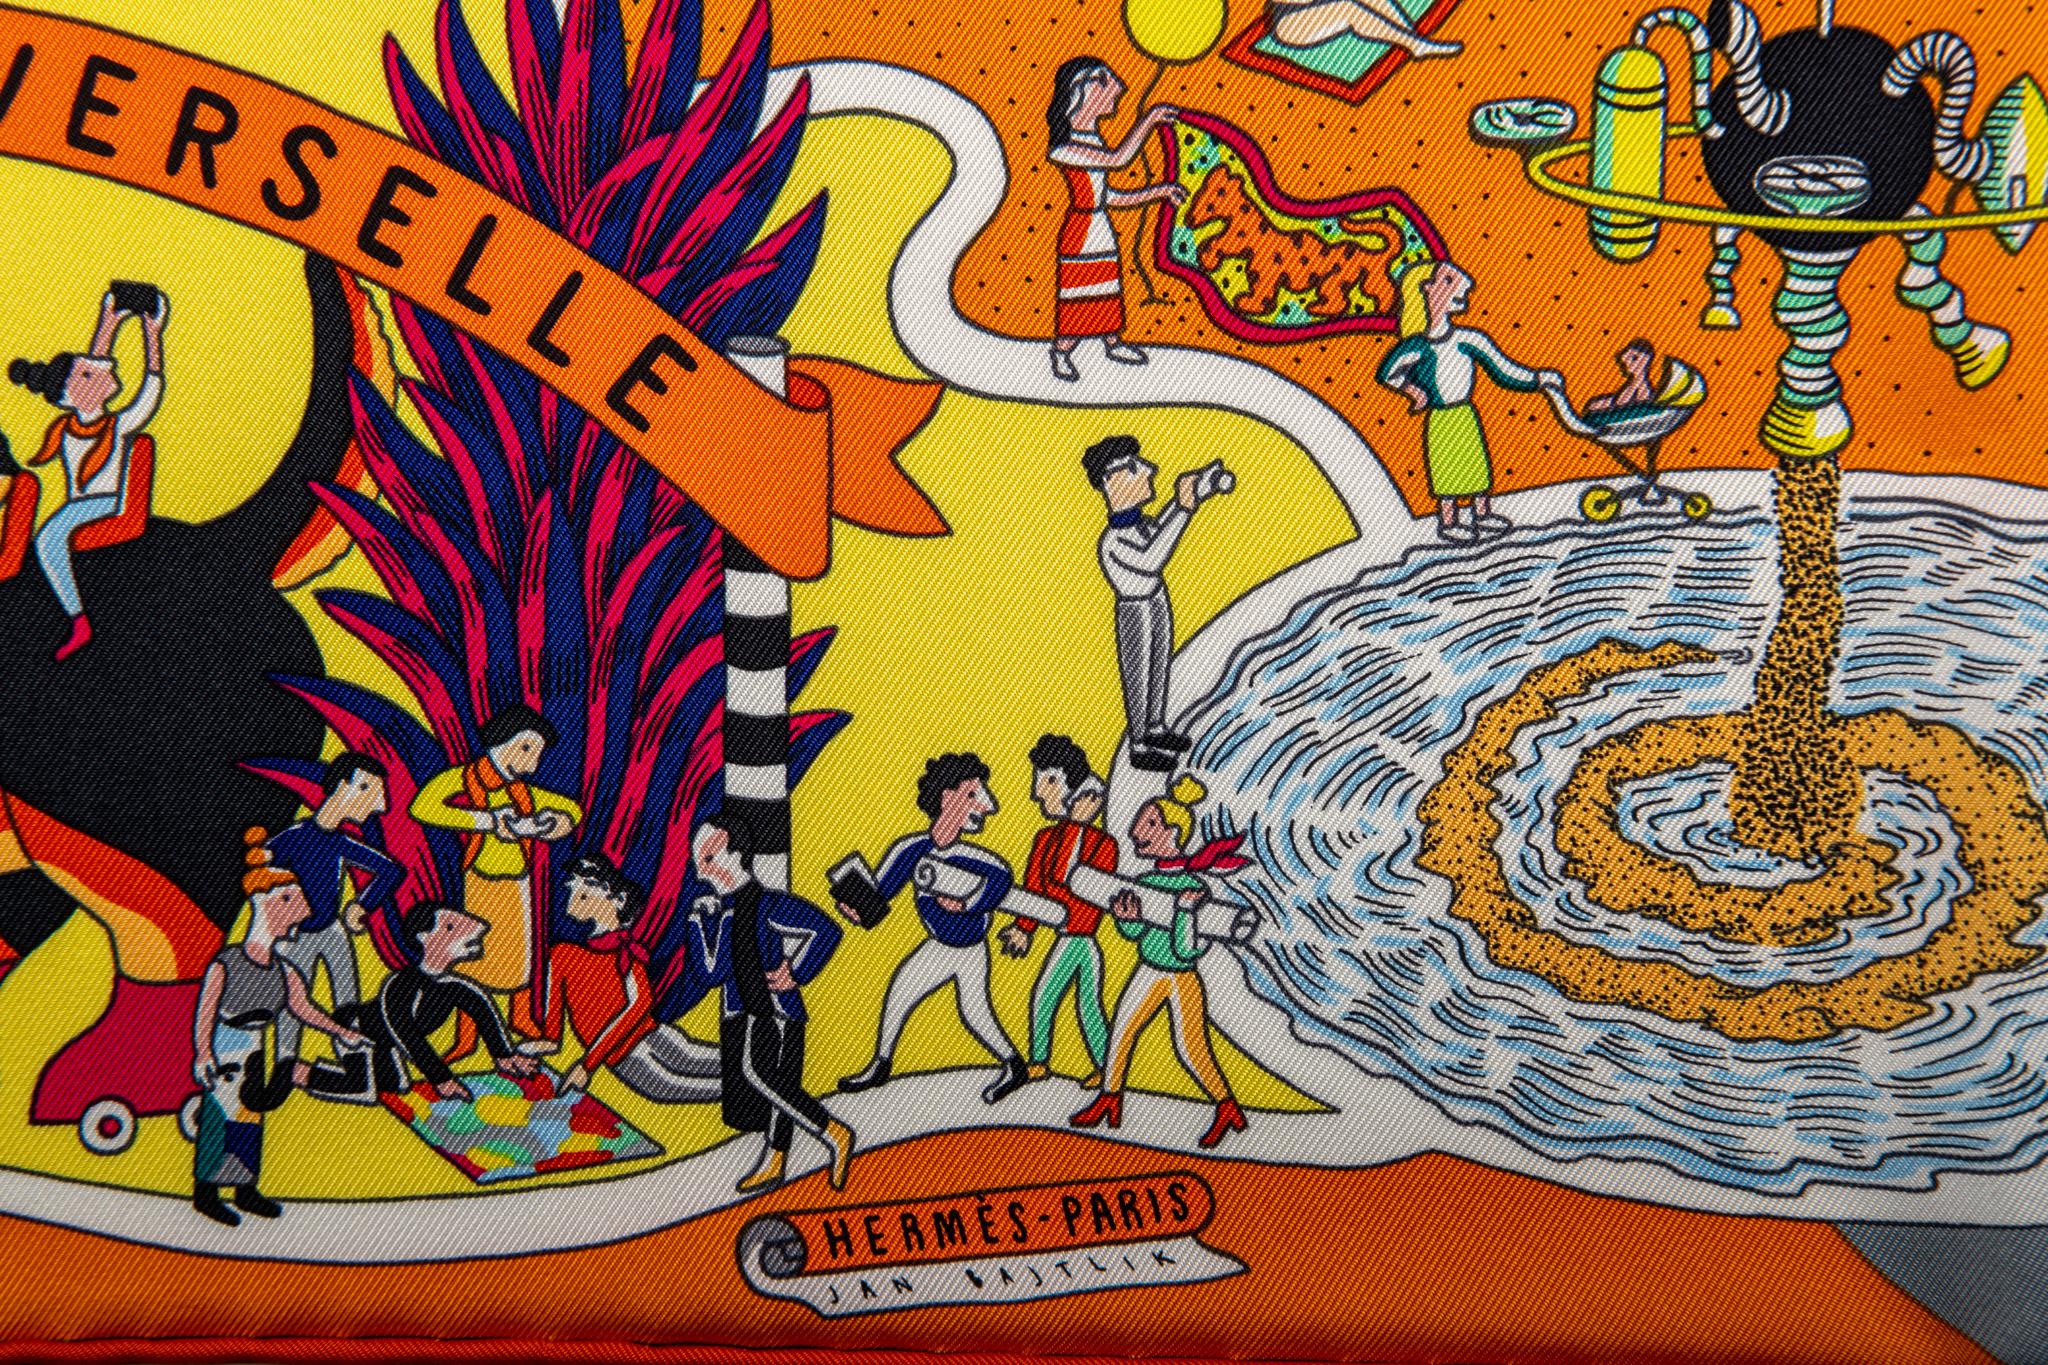 Hermes limited edition multicolor cartoon scarf in pure silk. Brand new in original box.